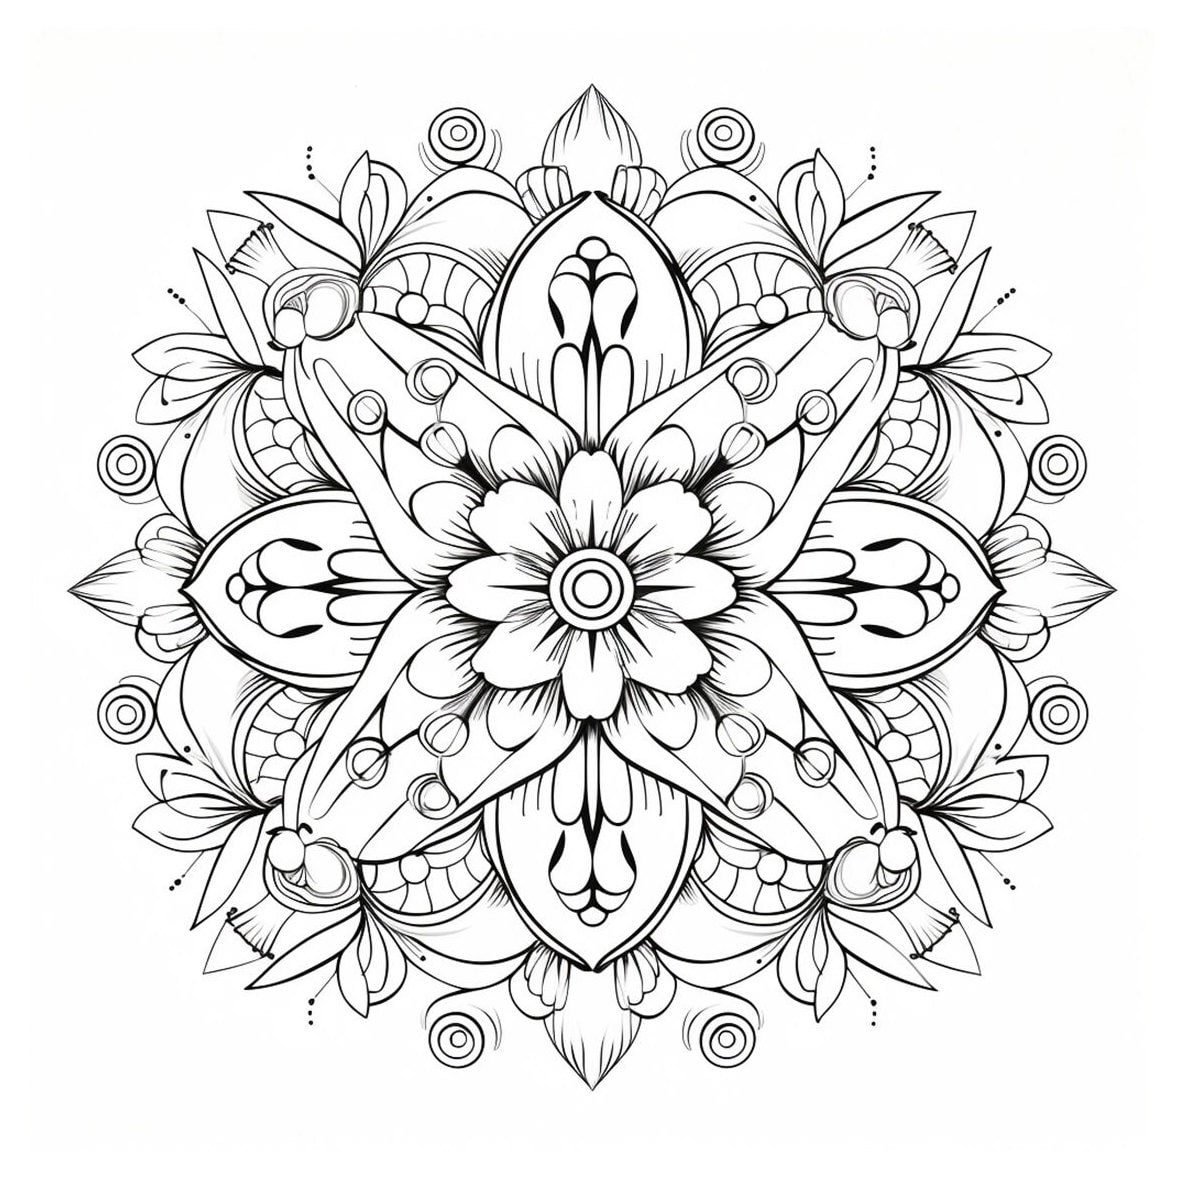 Intricate mandala adult coloring printable stress relief relaxation instant download pdf mindful coloring therapy diy art therapy download now